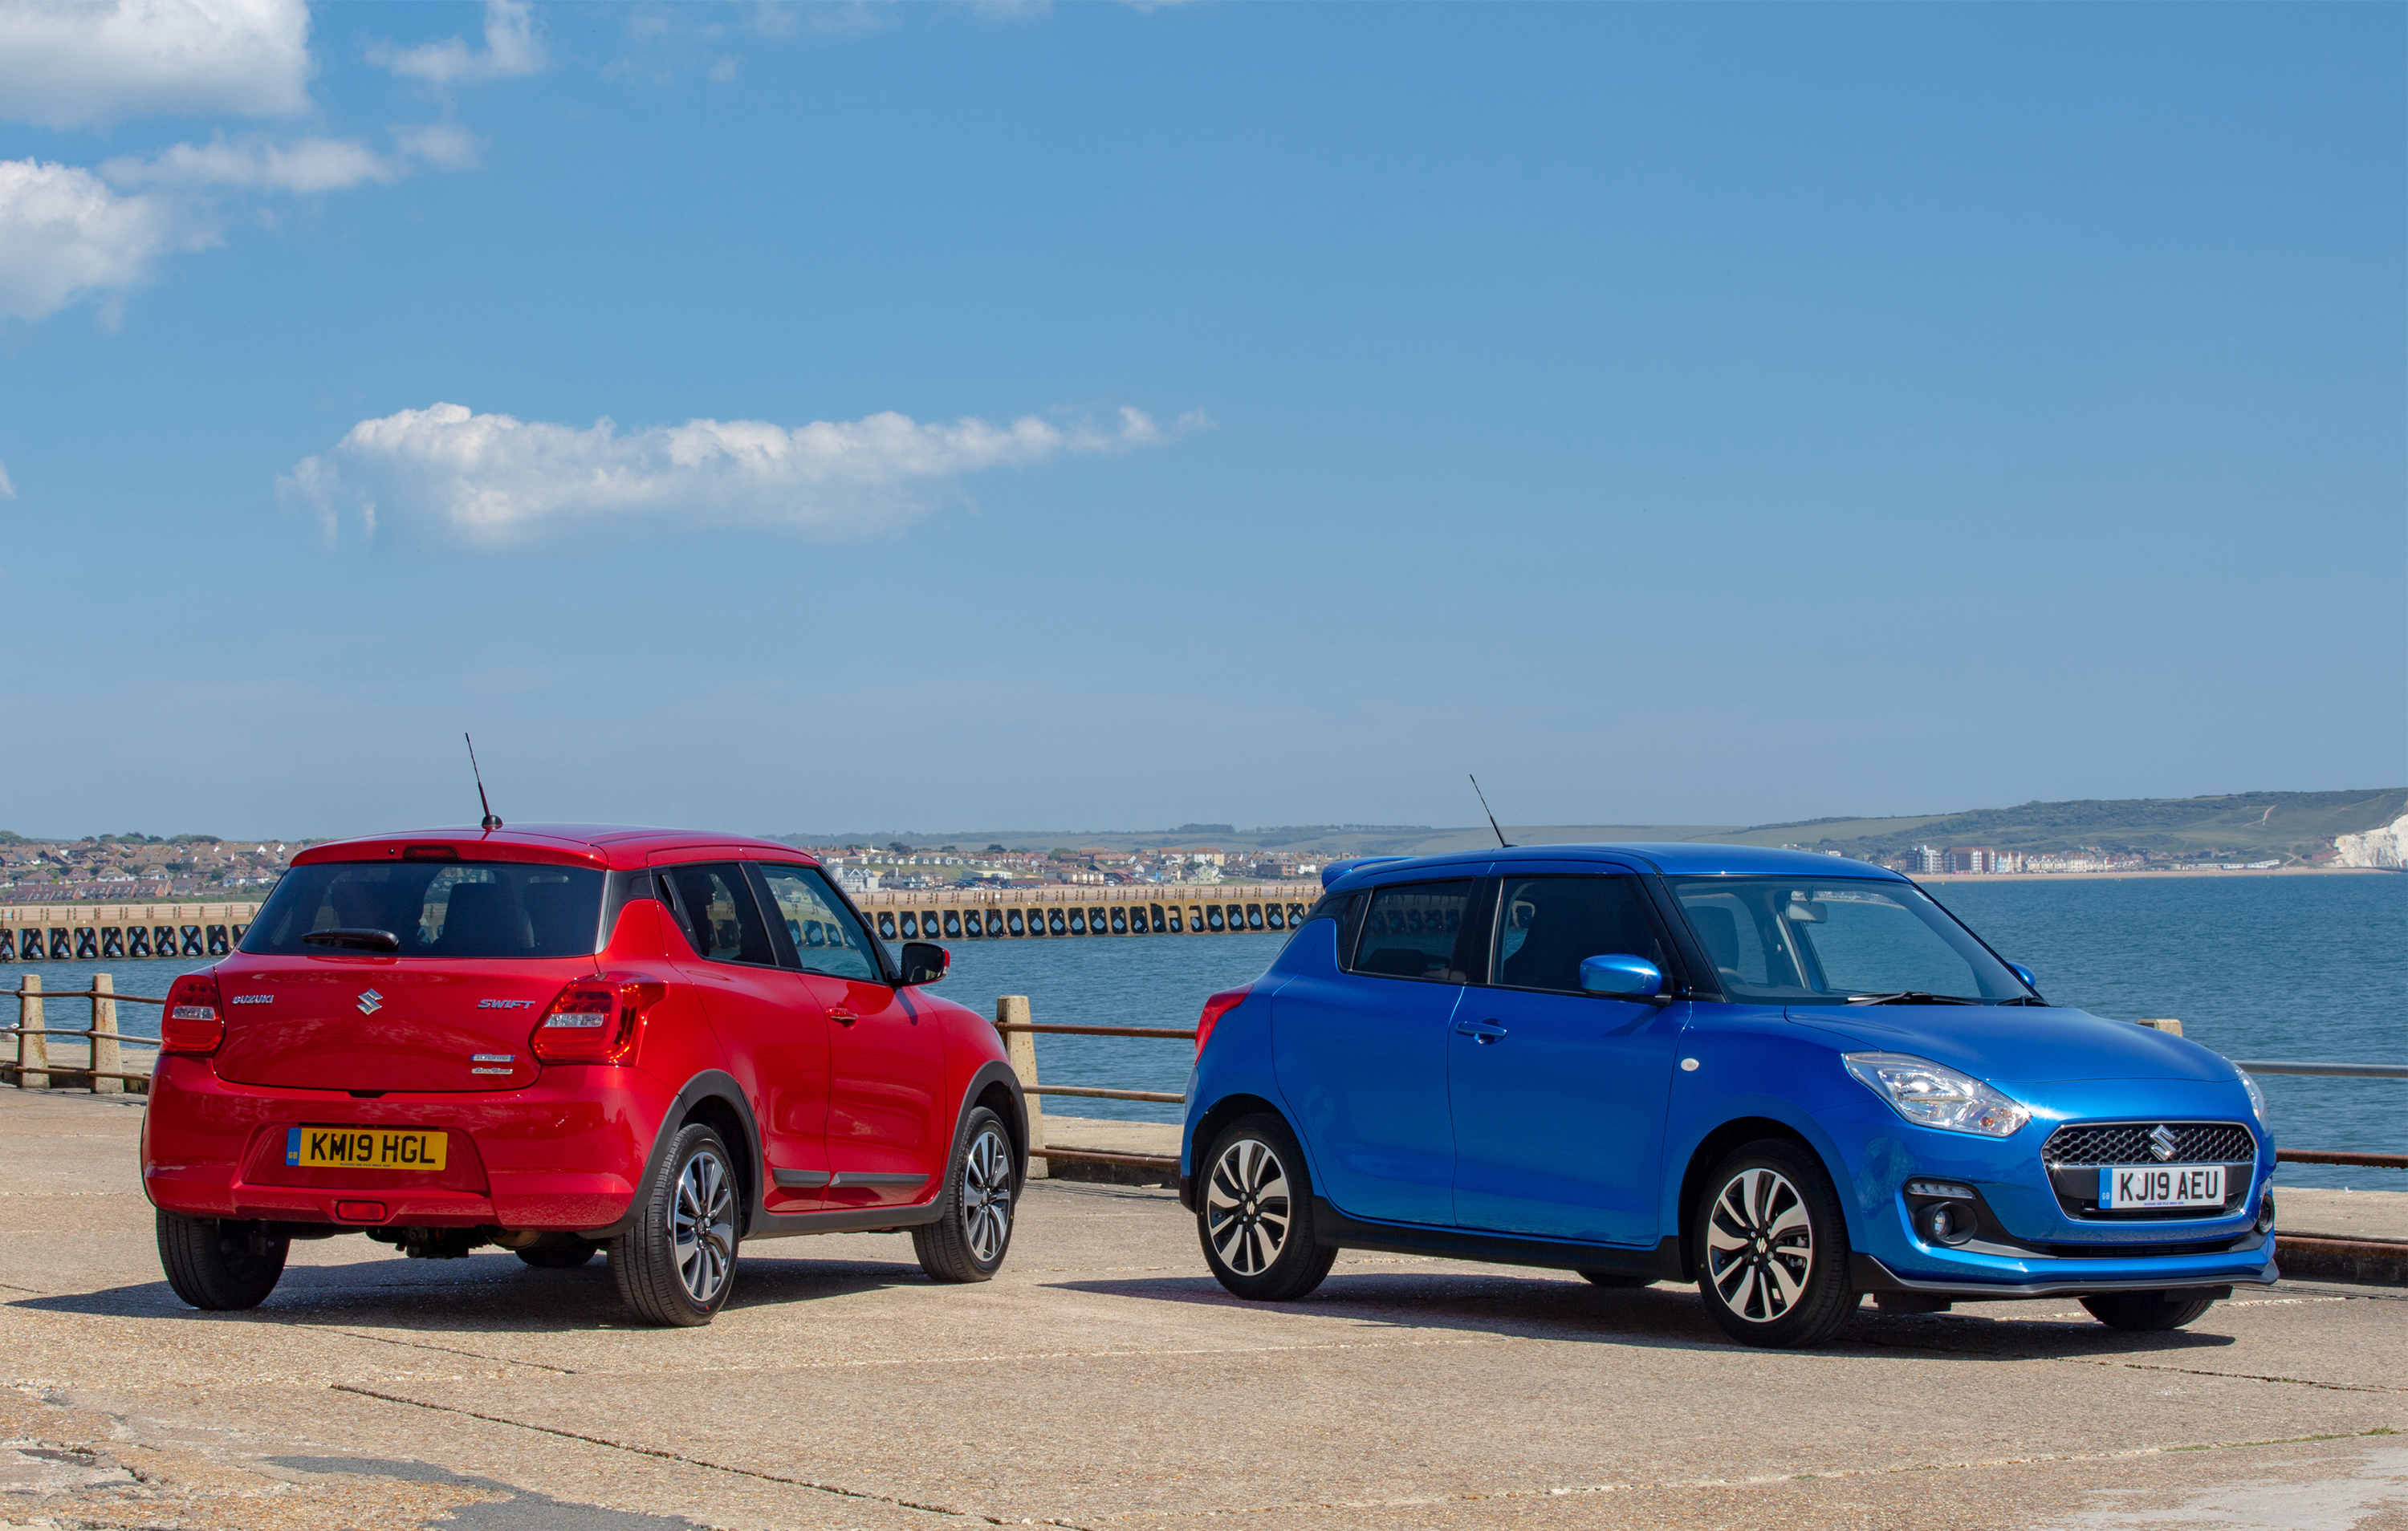 SUZUKI LAUNCHES ITS NEW APPROVED USED CAR PROGRAMME